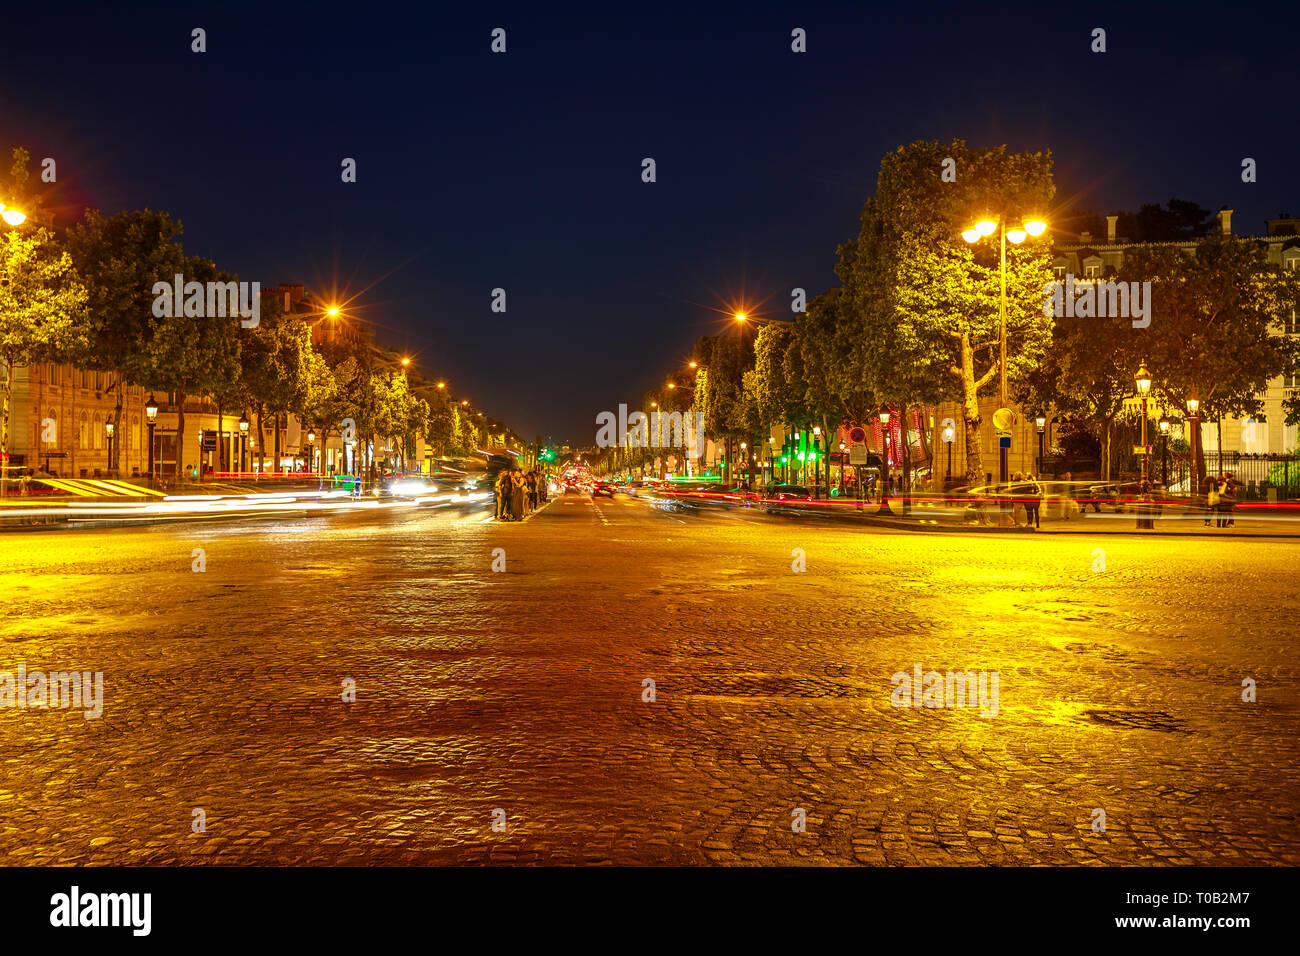 Paris, France - July 2, 2017:Crosswalk at night on the most famous avenue in Paris, the Champs Elysees, known for luxury and shopping. People Stock Photo